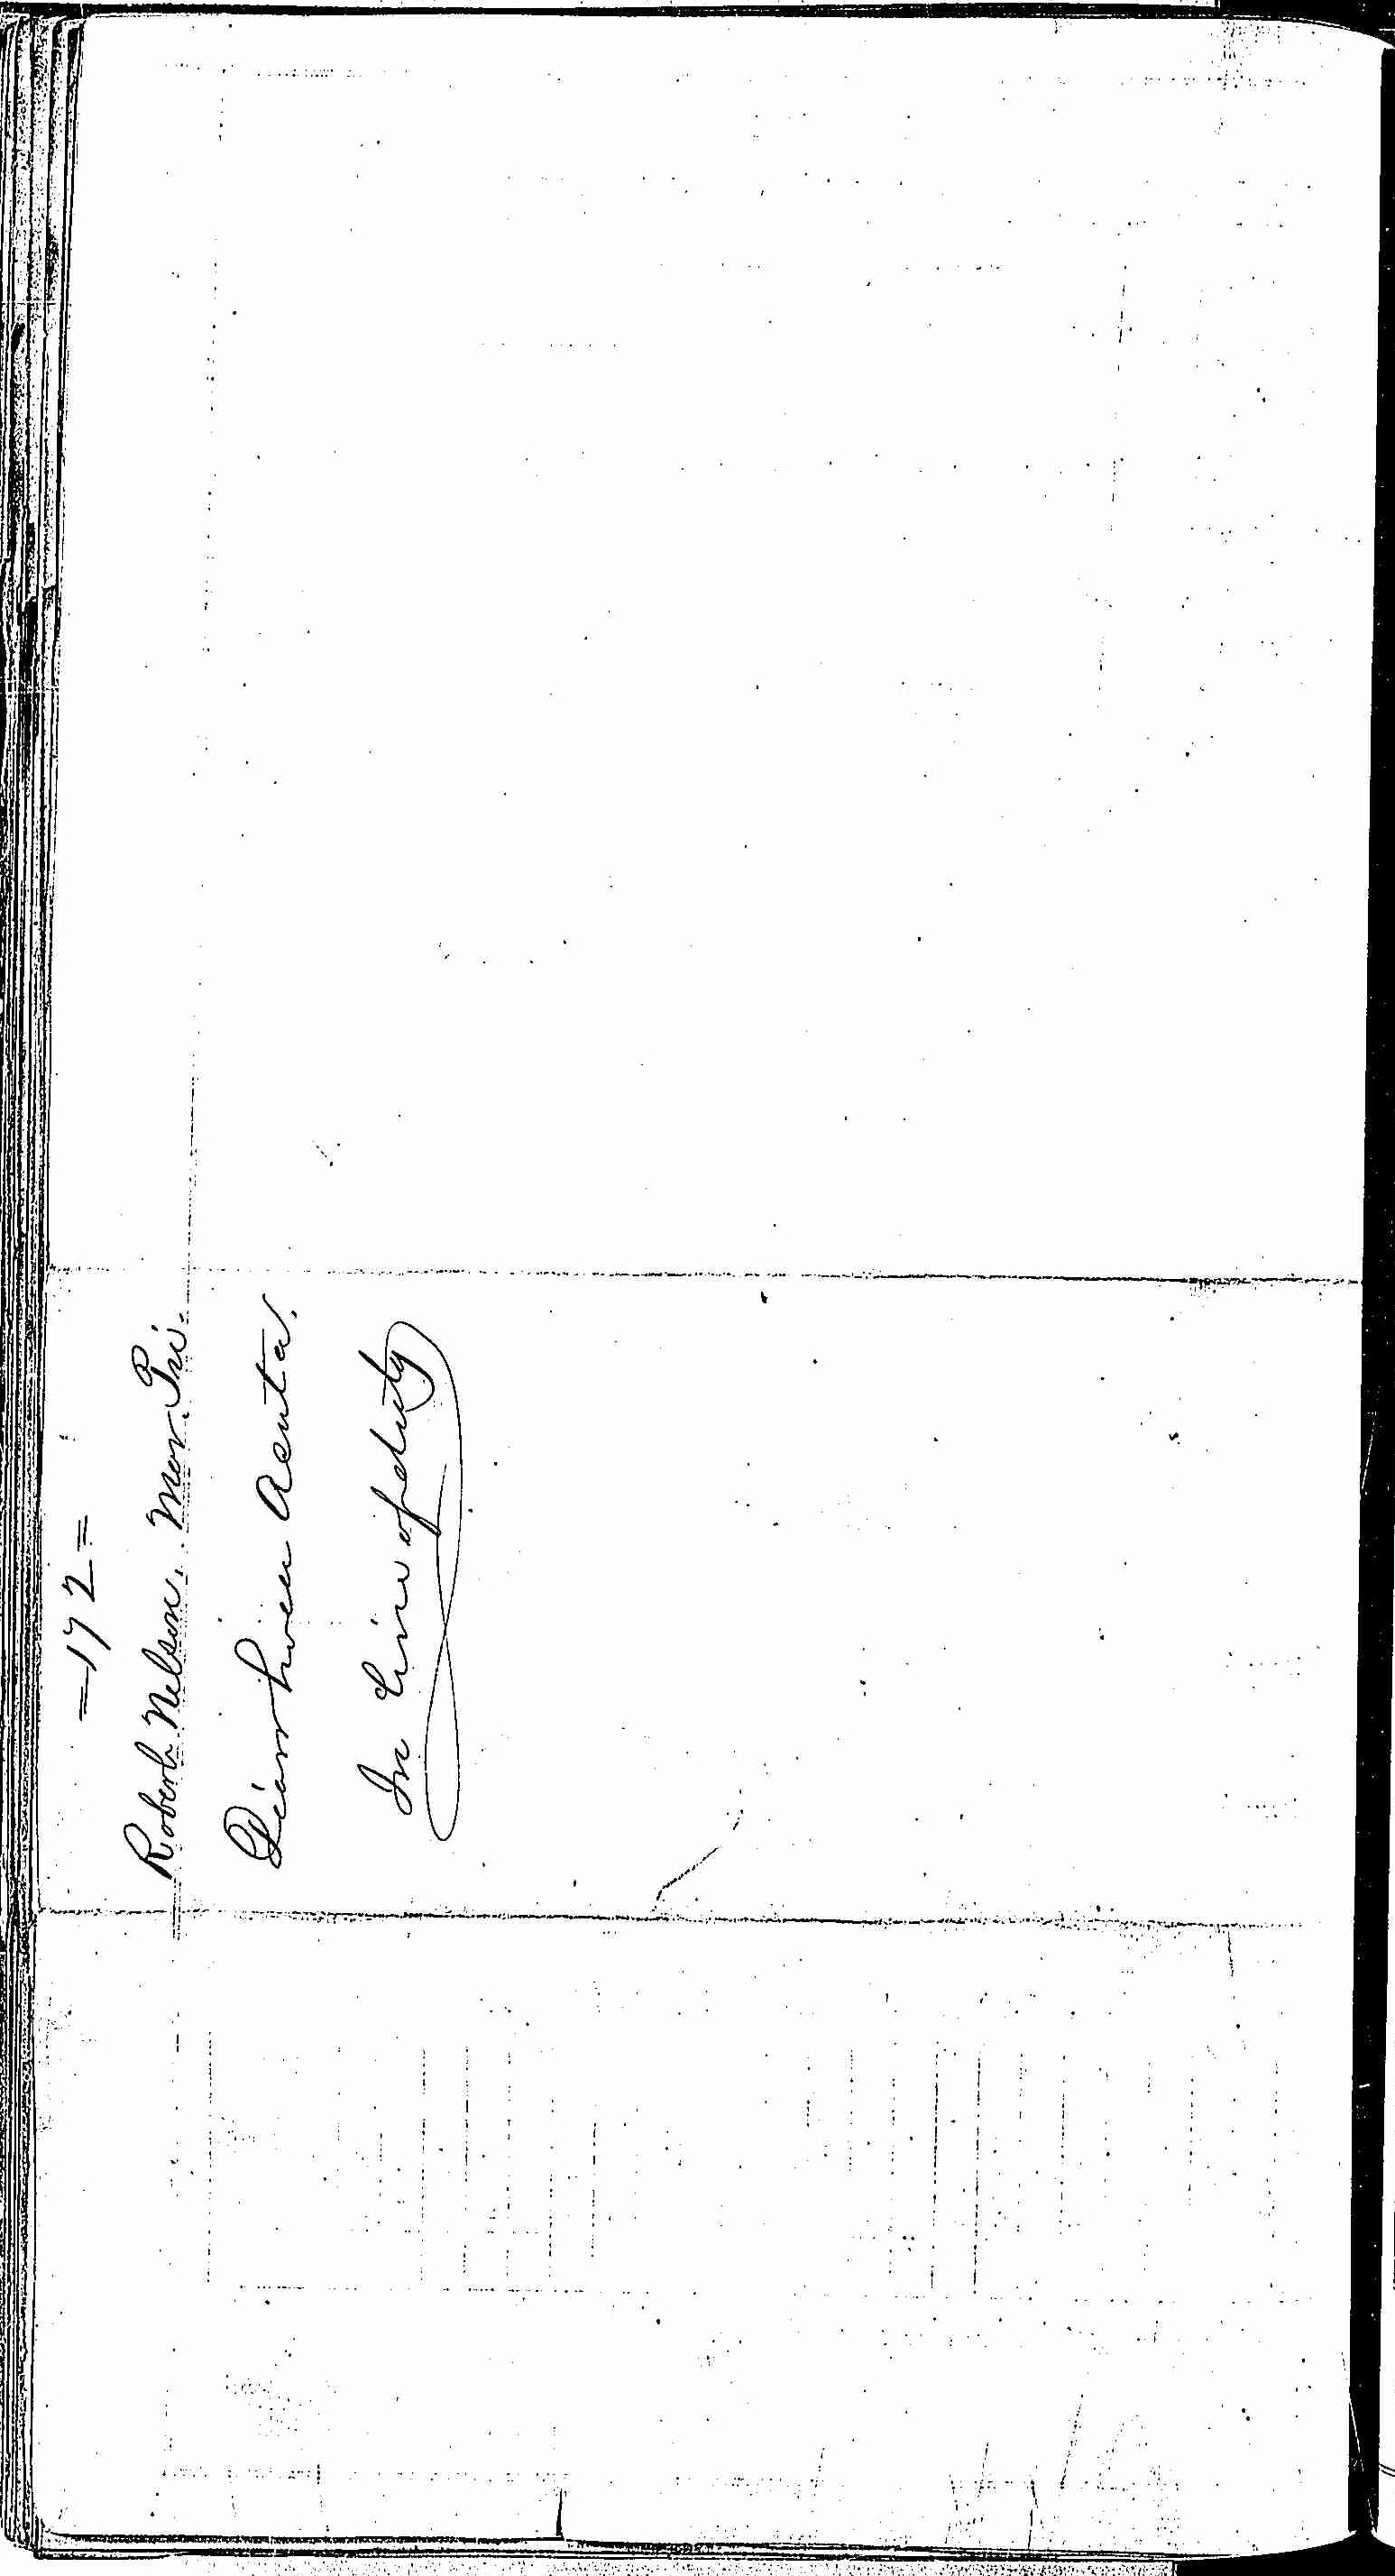 Entry for Robert Nelson (page 2 of 2) in the log Hospital Tickets and Case Papers - Naval Hospital - Washington, D.C. - 1866-68